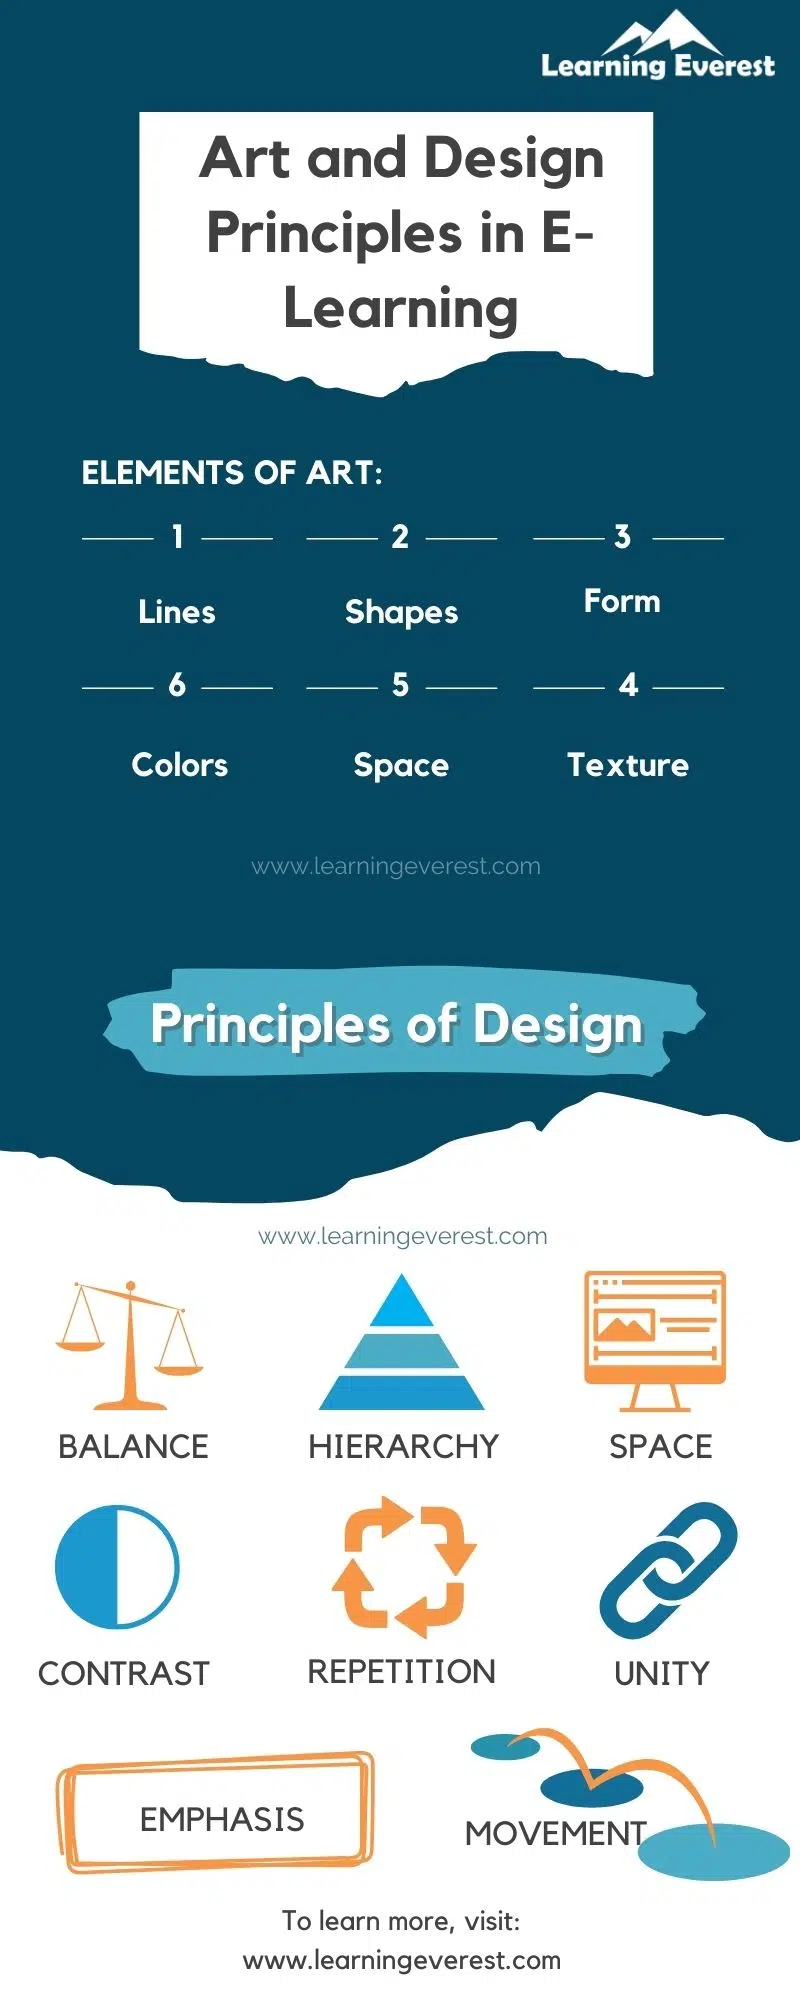 Elements of art and Principles of design